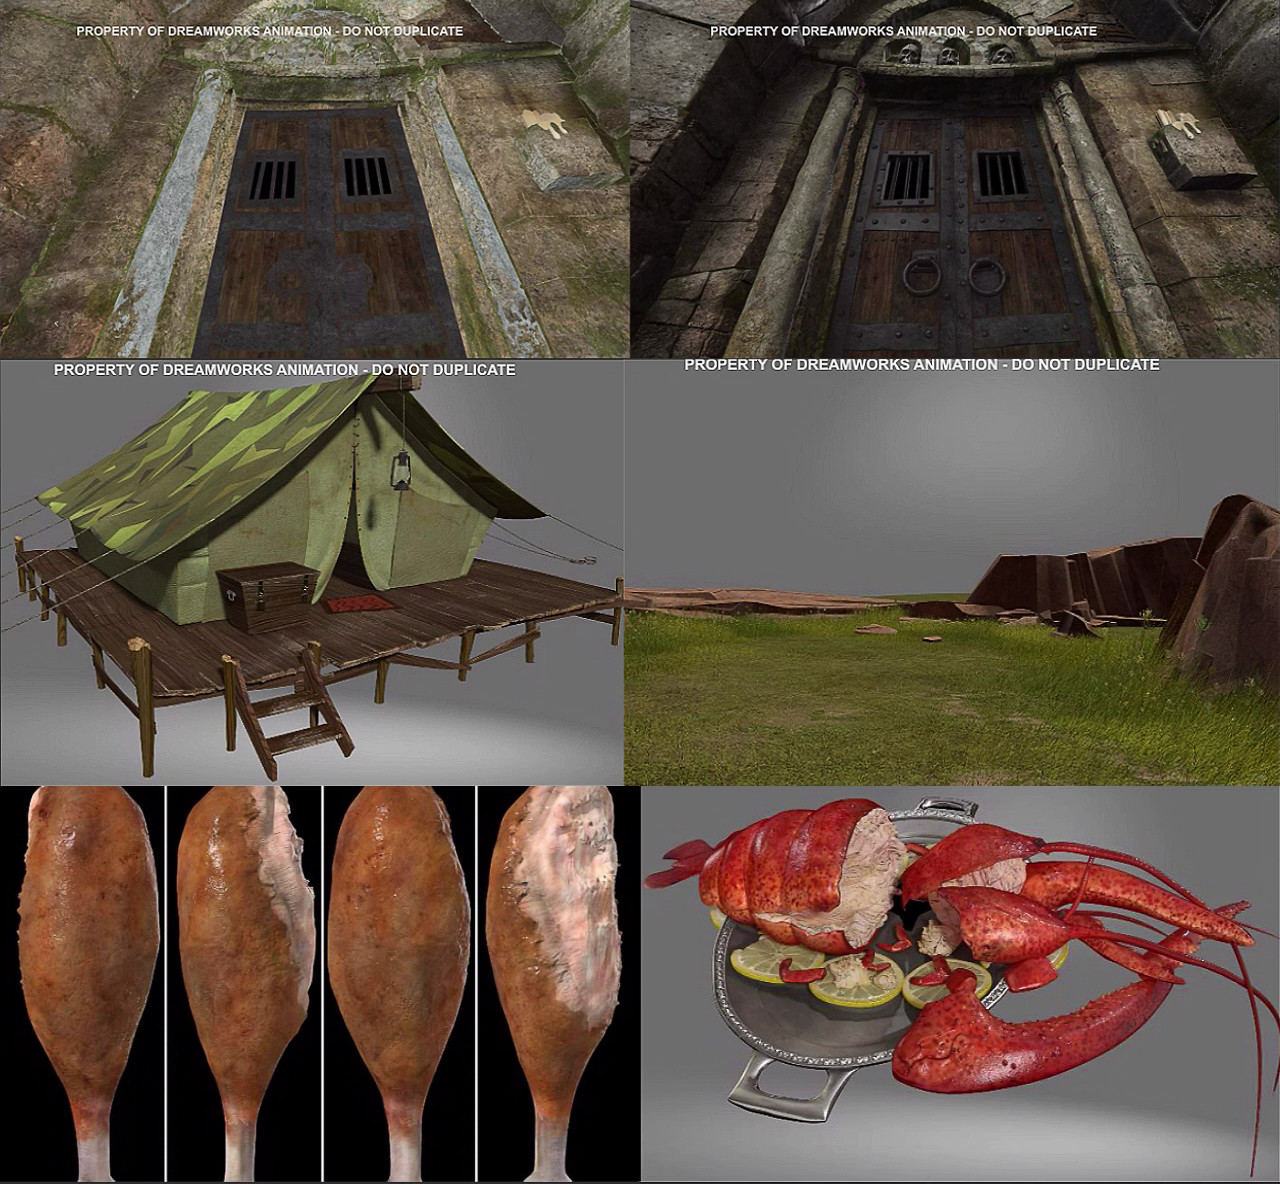 1st and 2nd image - Walls and Pillars for Puss in Boots The Three Diablos 
3rd - Tents 4th Ground and Grass for Madly Madagascar 
5th &amp; 6th image - Props for Scared Shrekless